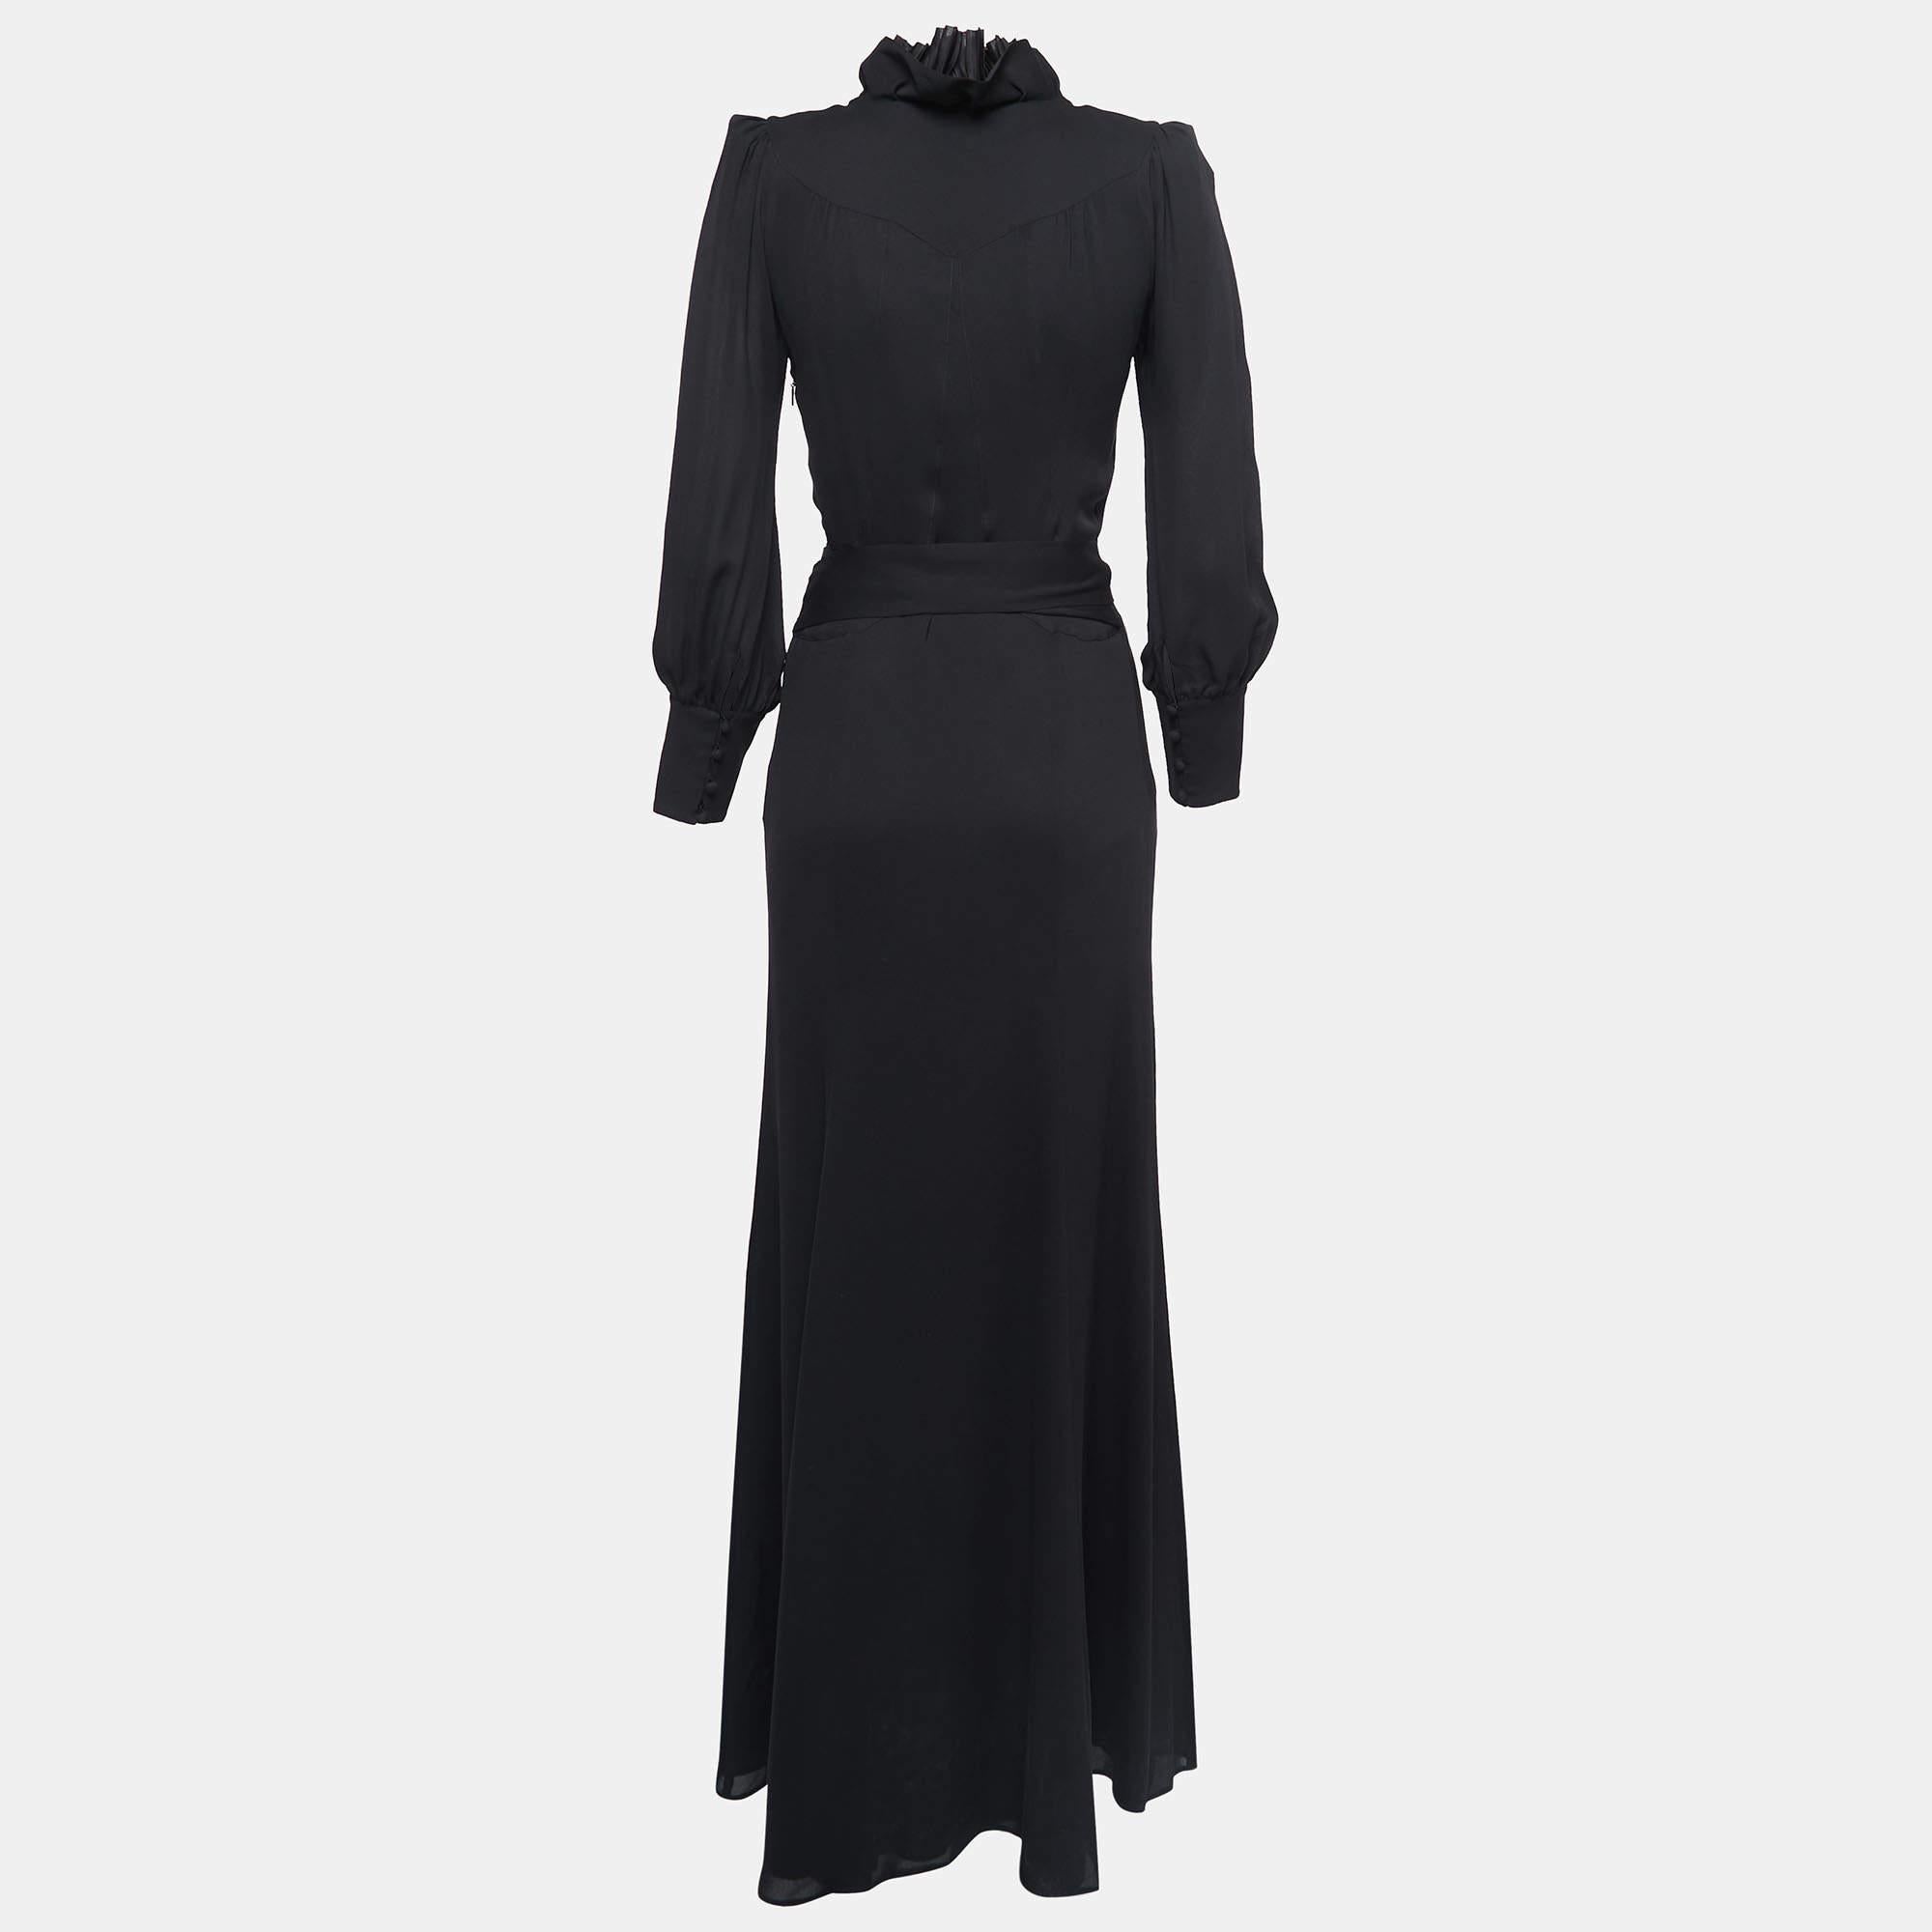 Exhibit a stylish look by wearing this beautiful designer dress. Tailored using fine fabric, this black Gucci dress has a chic silhouette for a framing fit. Style the creation with chic accessories and pumps.

